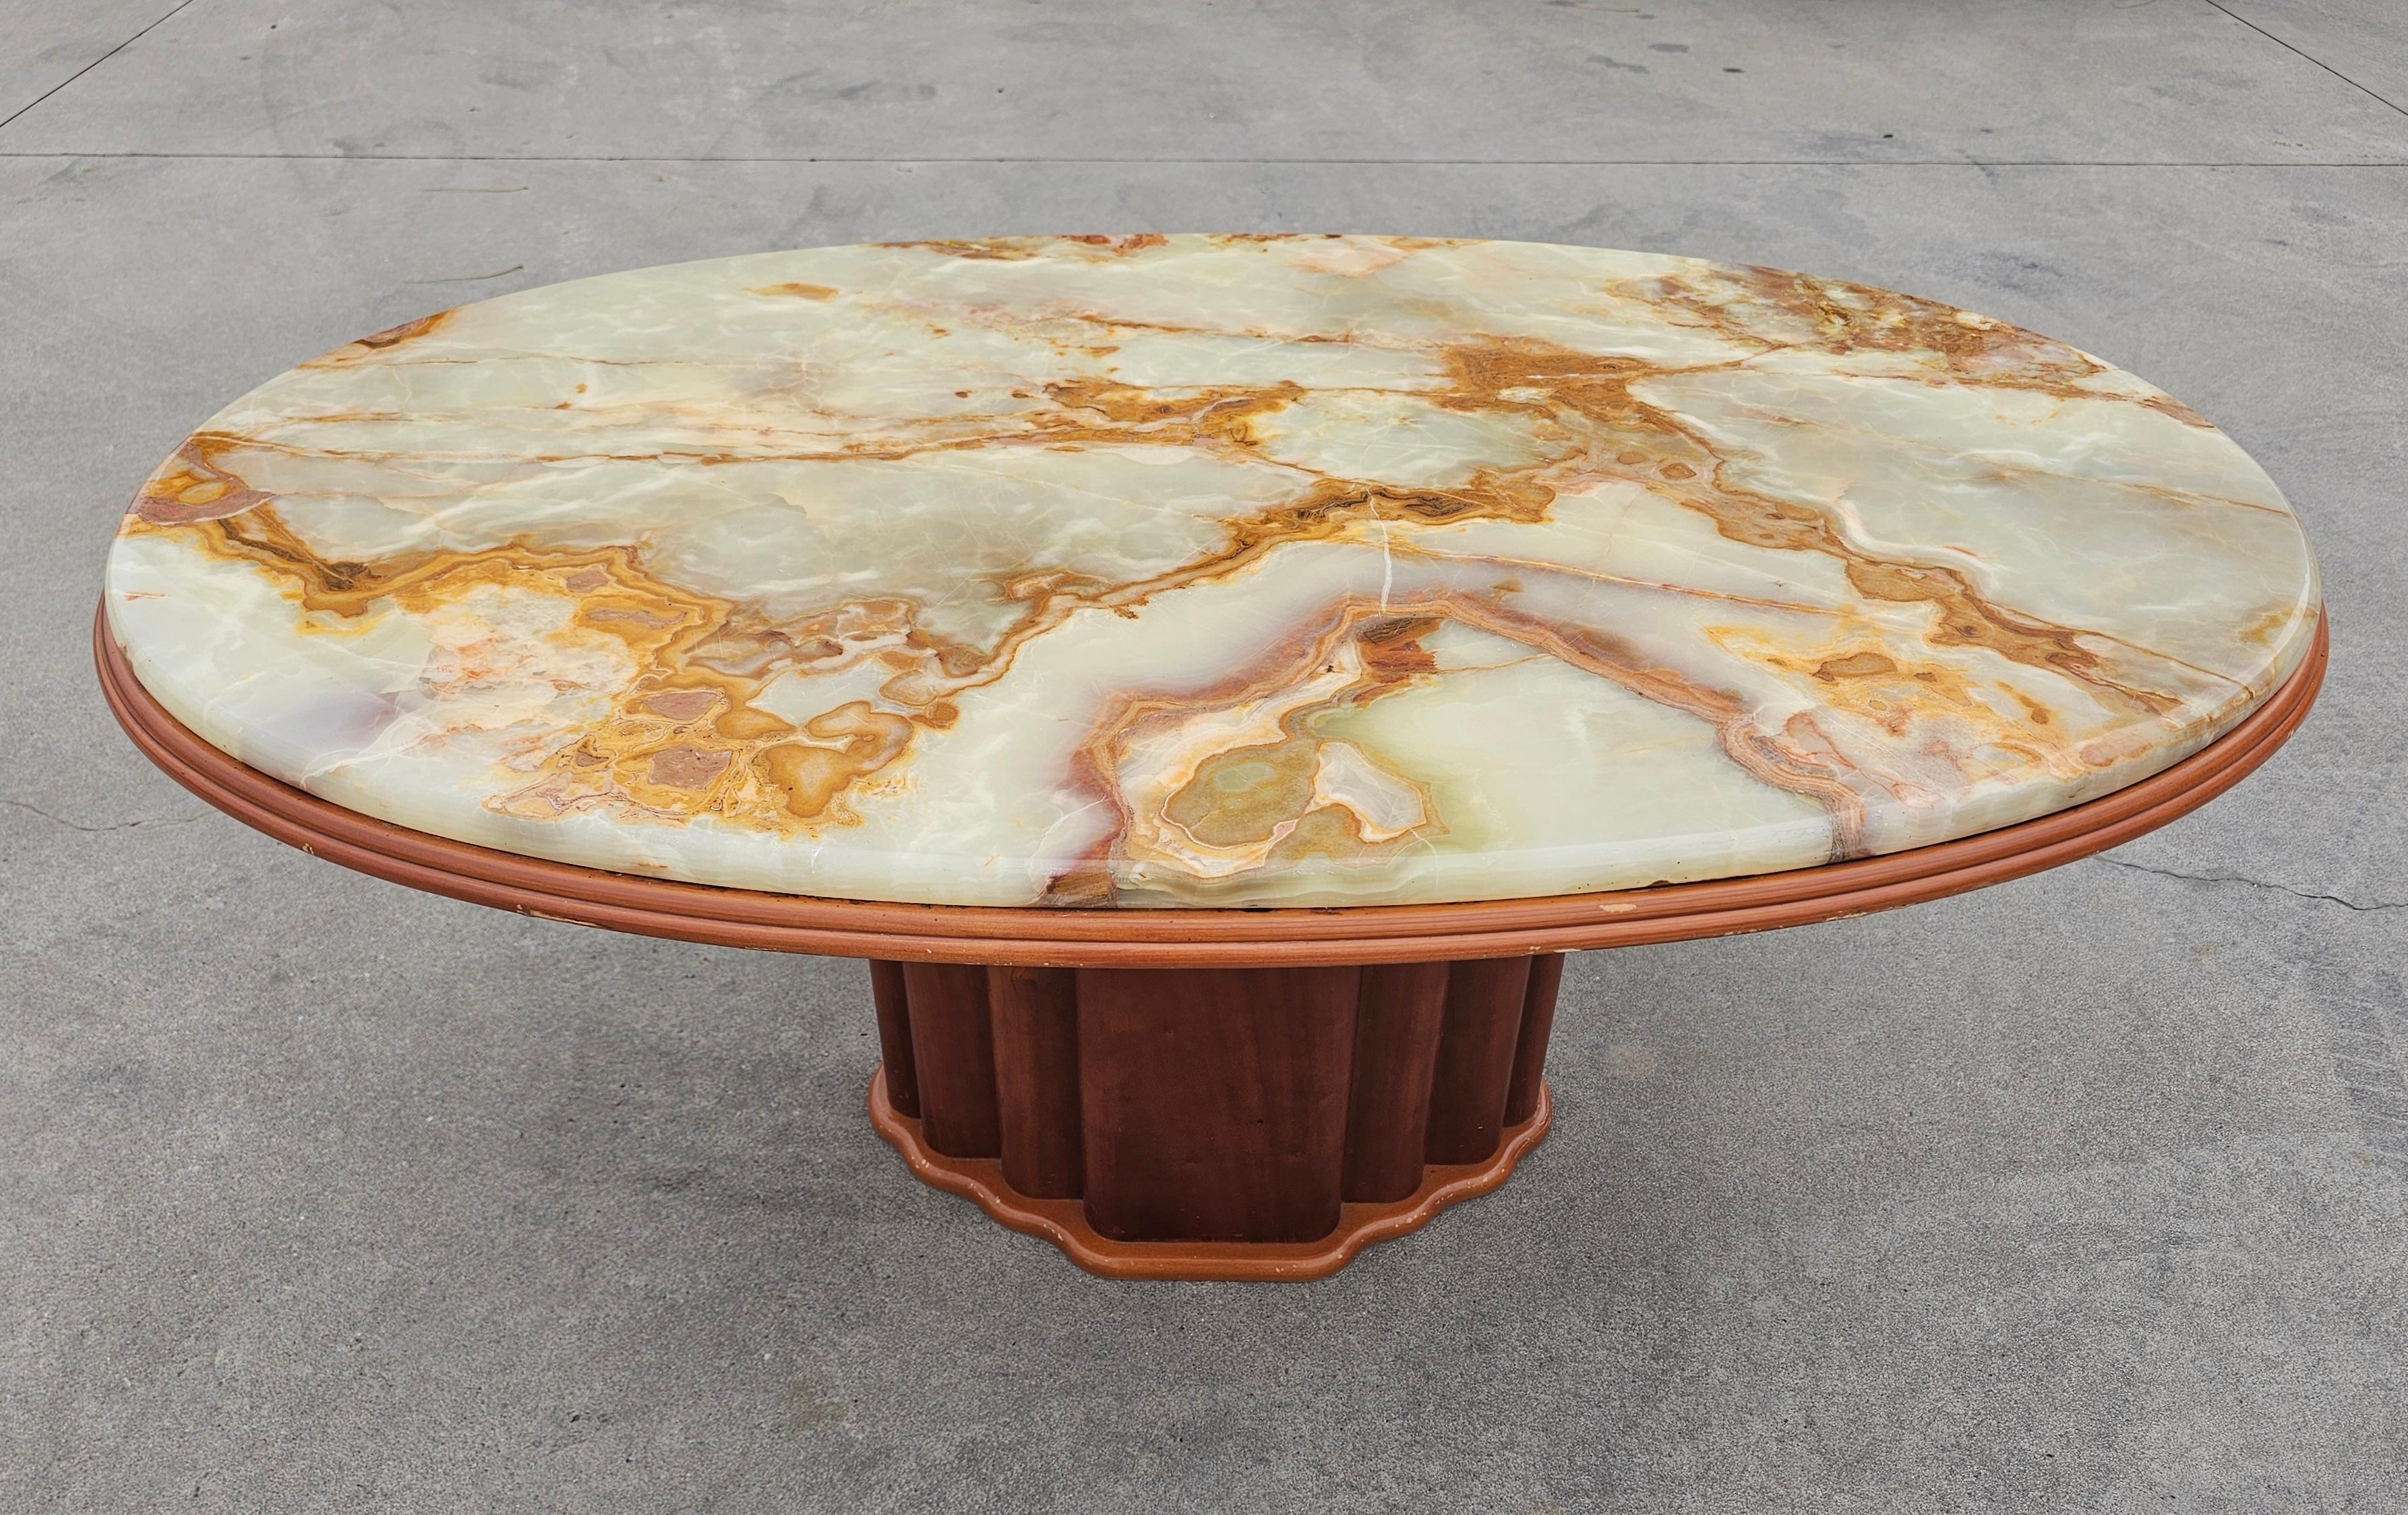 Art Deco Inspired Coffee Table with Onyx Top by Hohnert Design, Germany 1970s For Sale 3